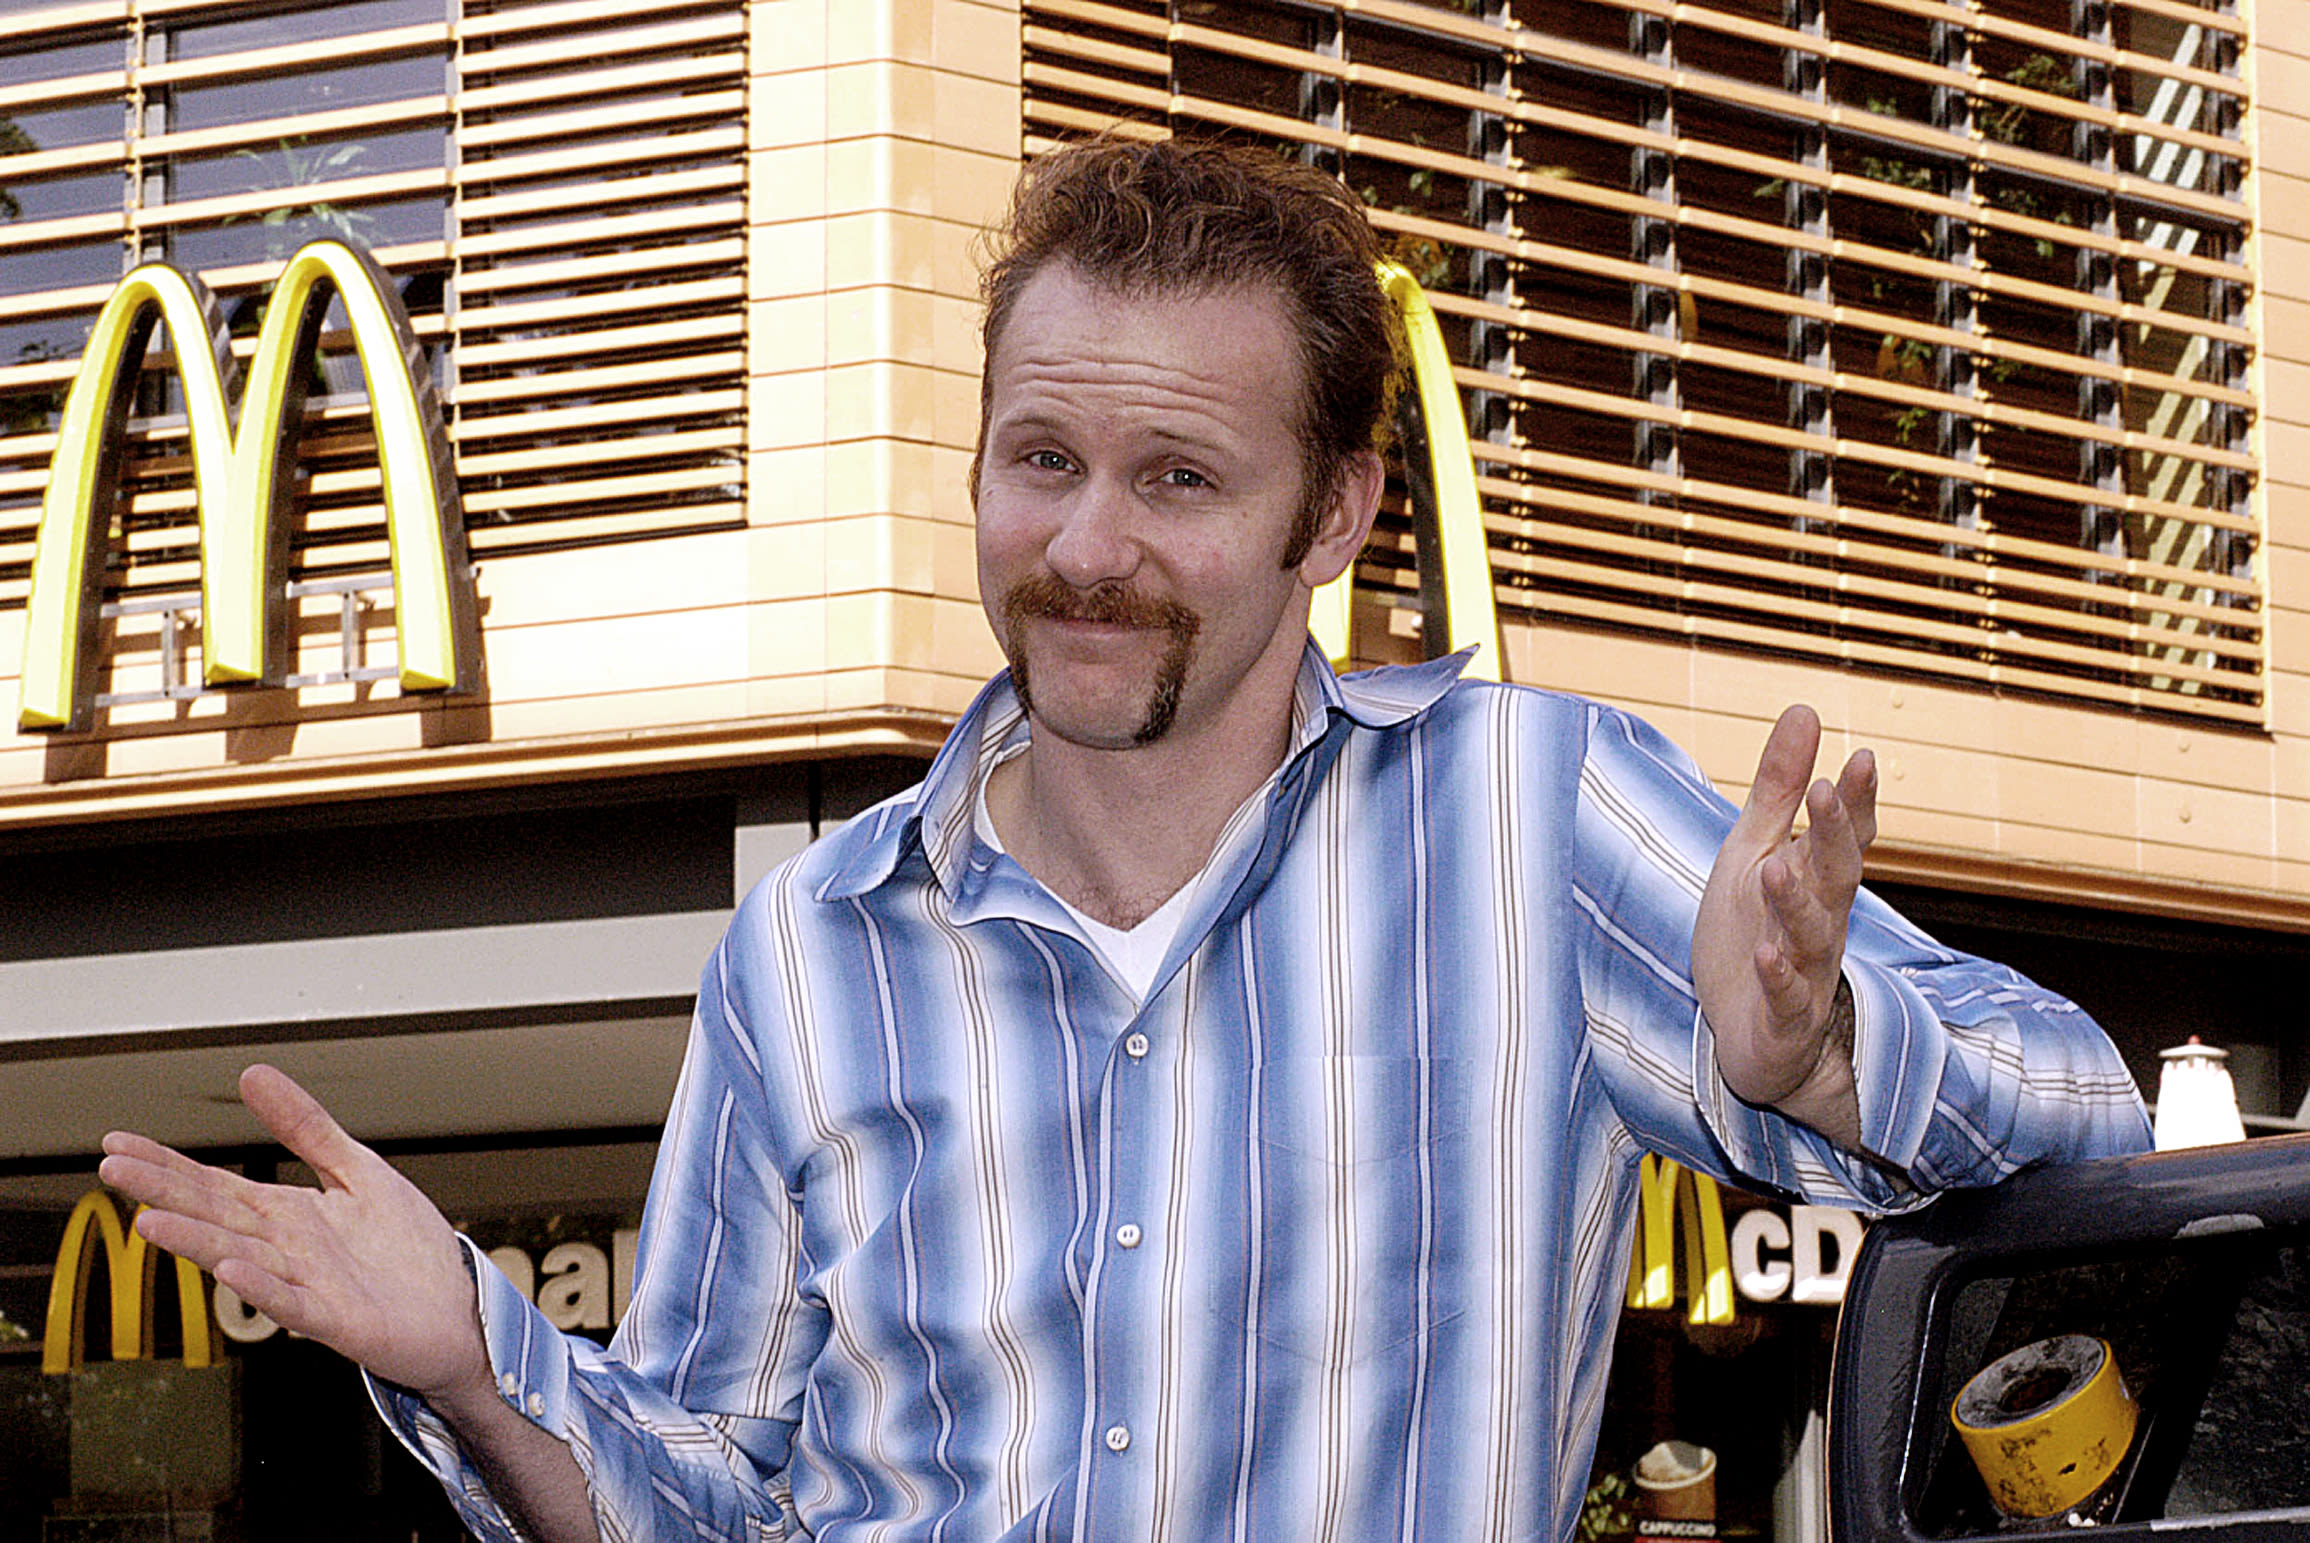 Documentary Community Remembers Morgan Spurlock: ‘Ahead of His Time in So Many Ways’